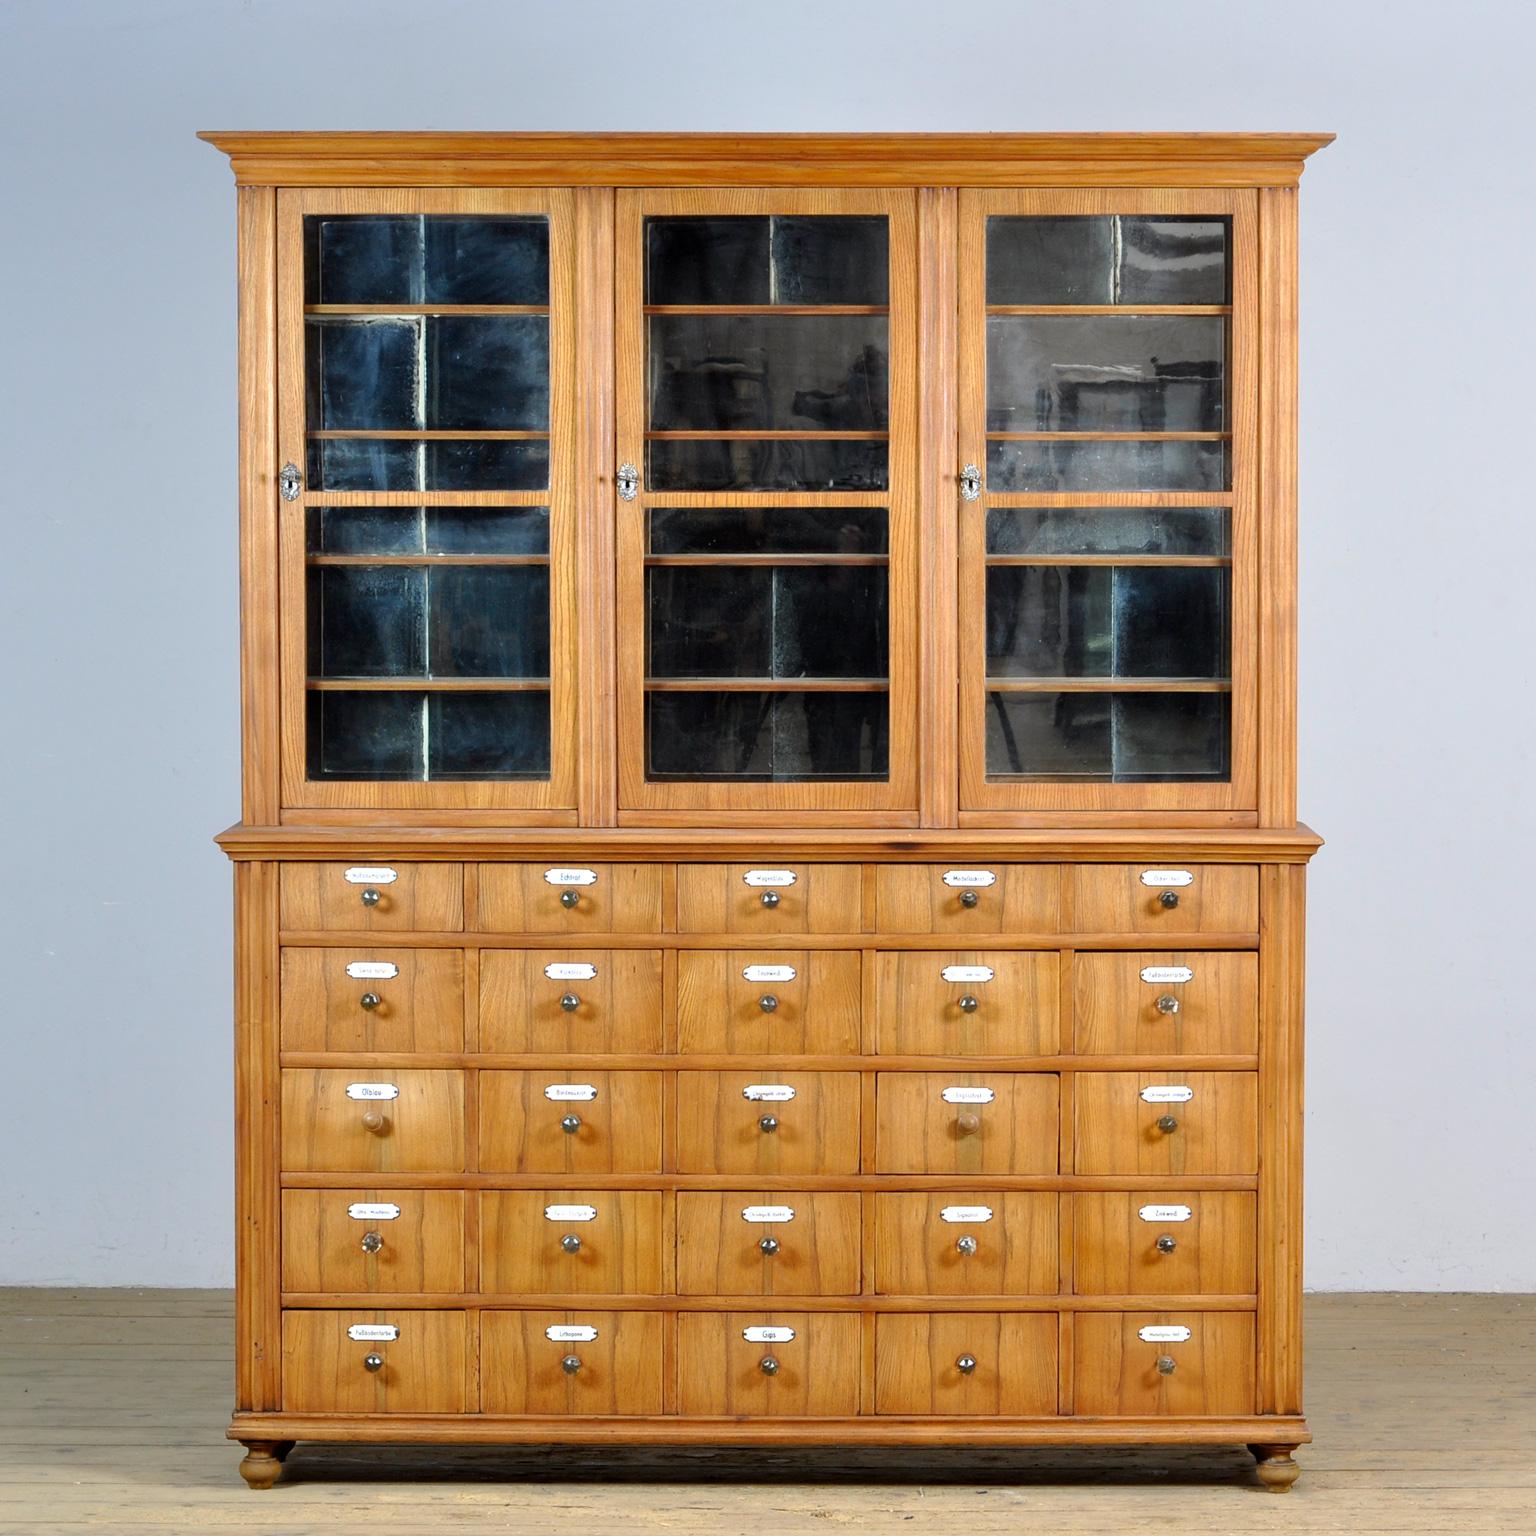 The cabinet is made of oak with drawers and back of pine wood. The cabinet consists of 2 parts. In the upper part there are three doors with the original antique glass. Behind each door are 4 shelves with a weathered mirror behind them. The mirror